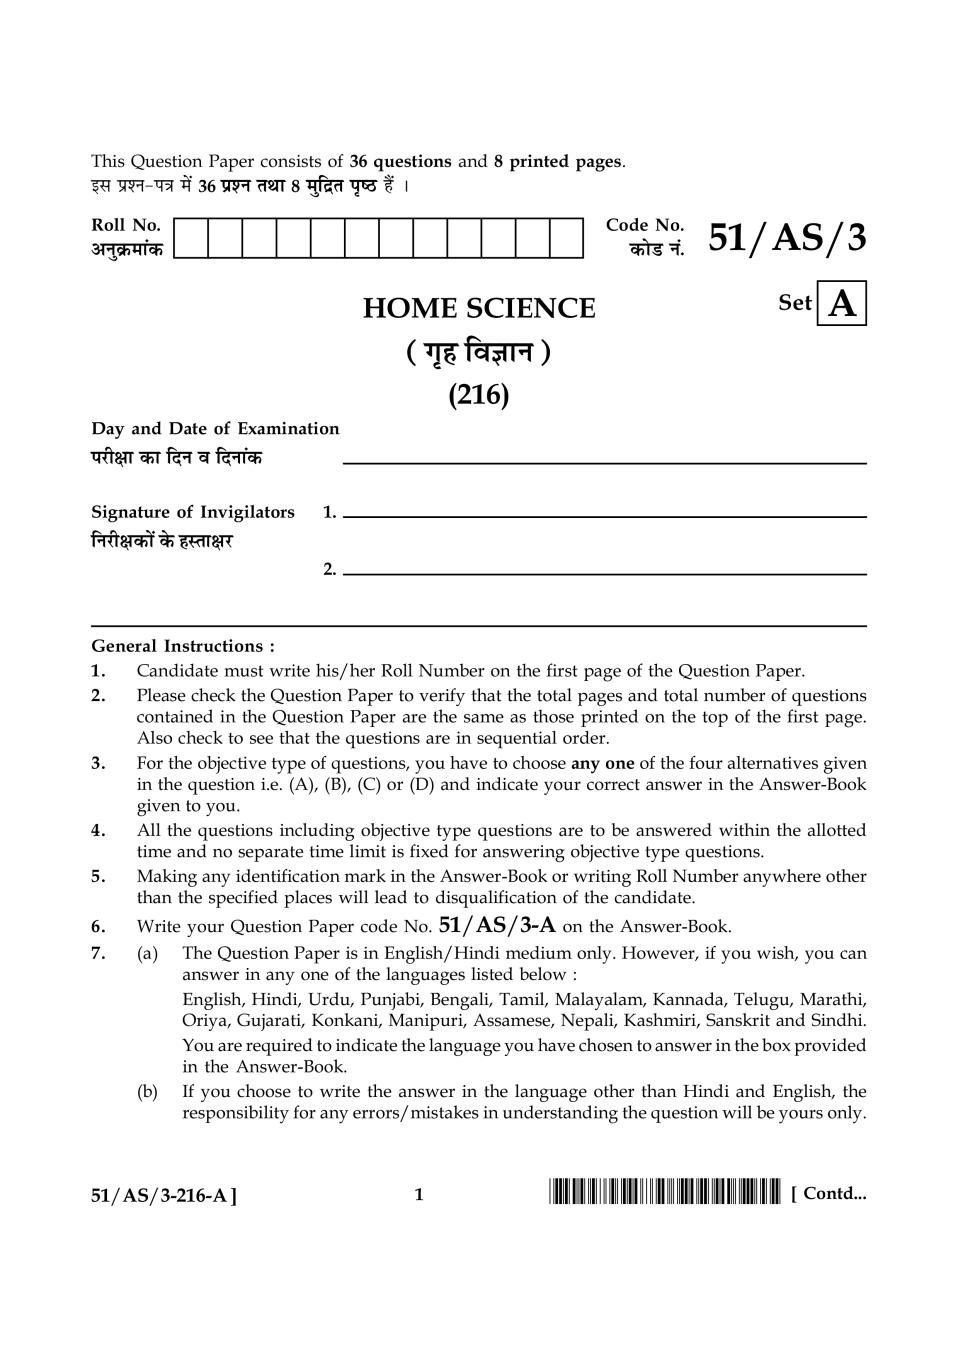 NIOS Class 10 Question Paper Oct 2015 - Home Science - Page 1